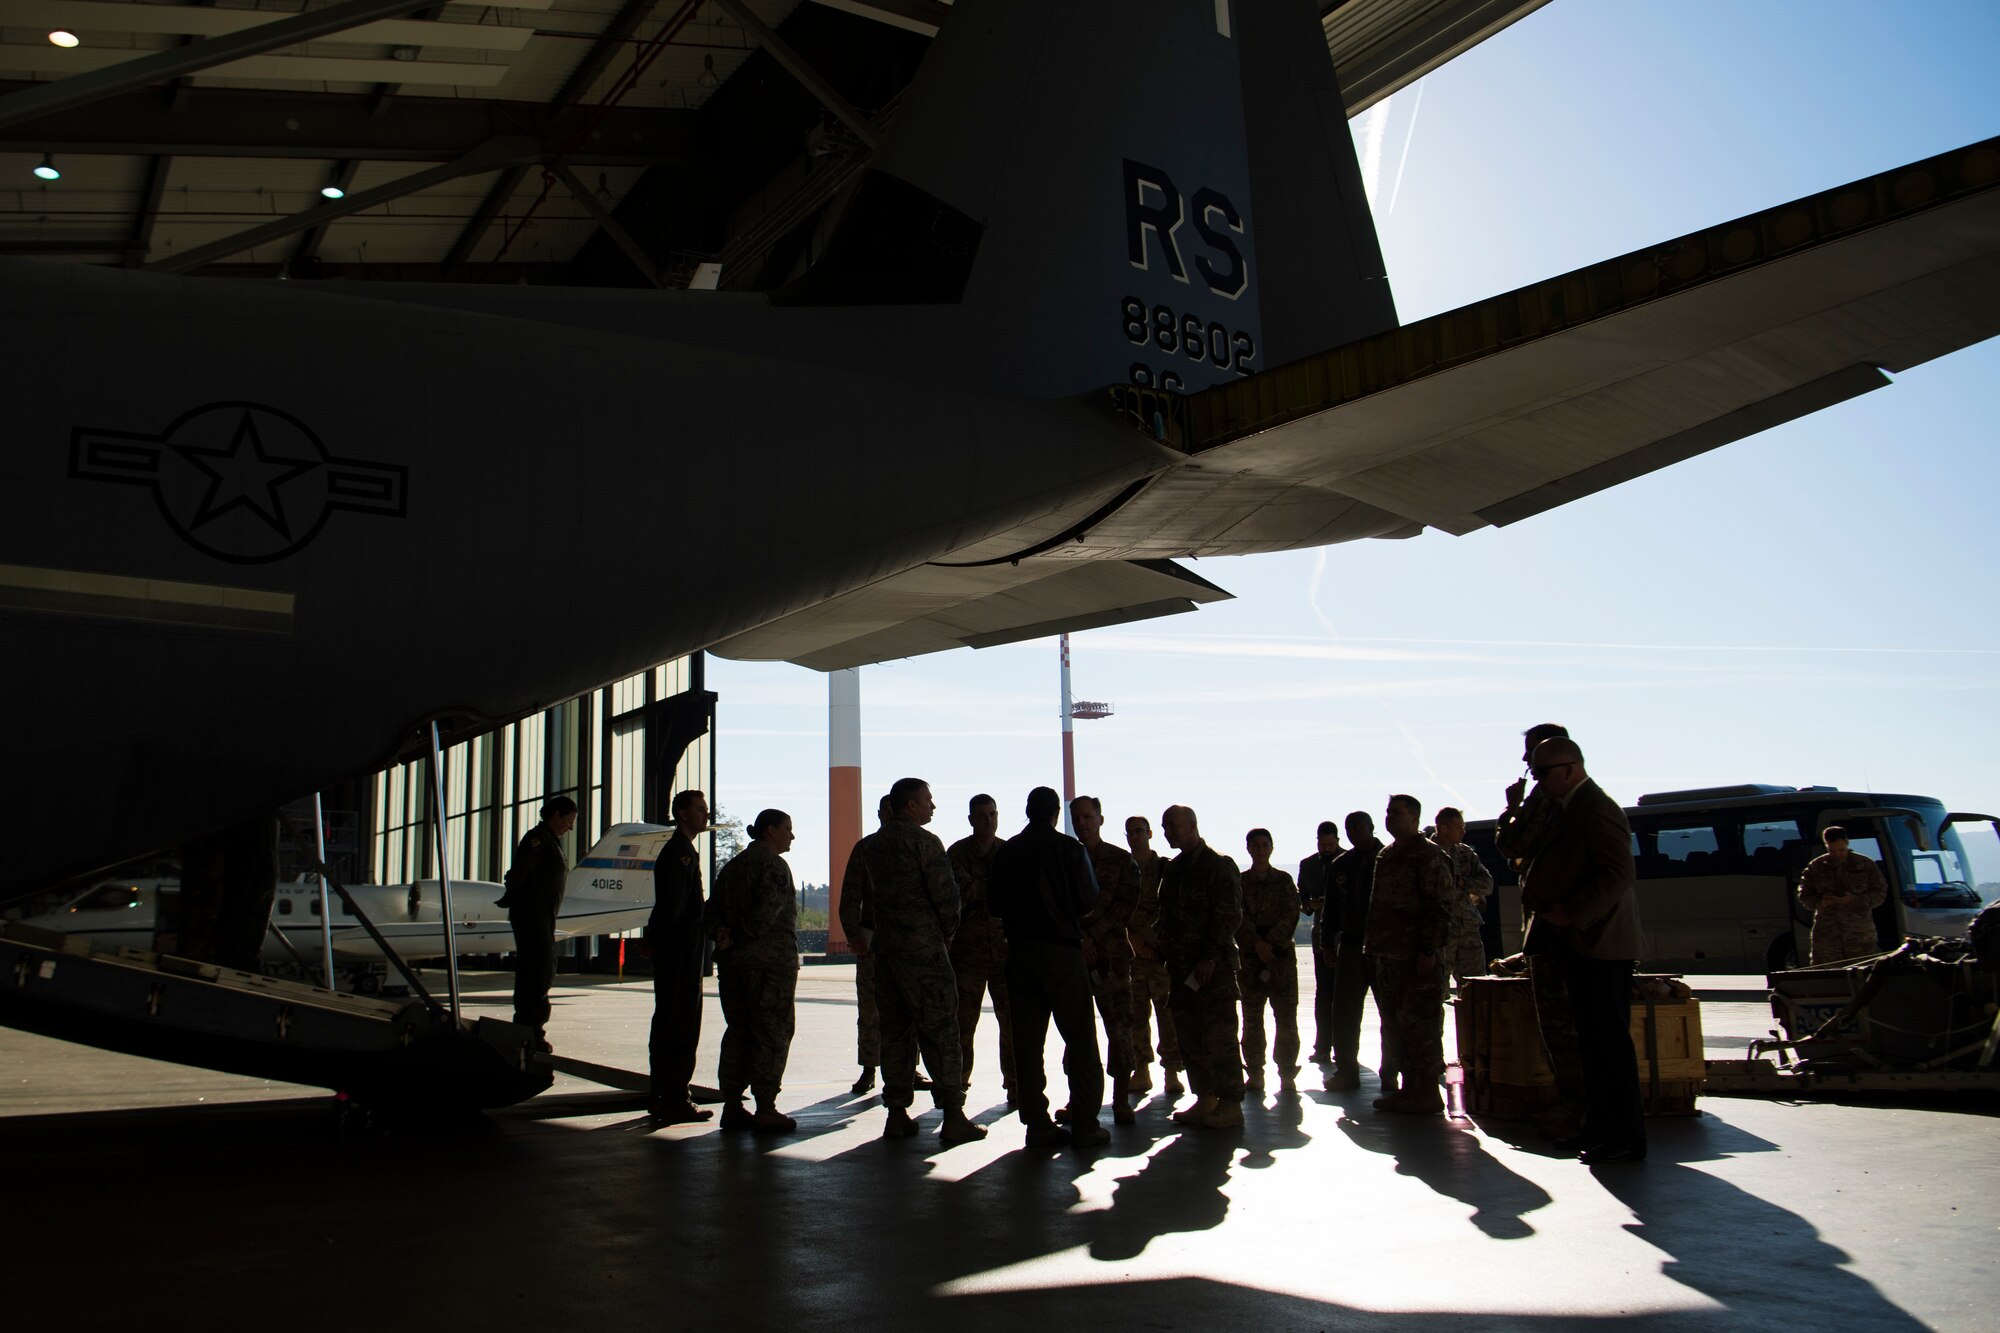 Leadership teams from the Third Air Force are briefed by members of the 86th Aeromedical Evacuation Squadron during an immersion tour of the 86th AW Oct. 5, 2018, at Ramstein Air Base, Germany. Airmen spoke on the part their units play in Ramstein’s diverse mission. (U.S. Air Force photo by Senior Airman Devin M. Rumbaugh)